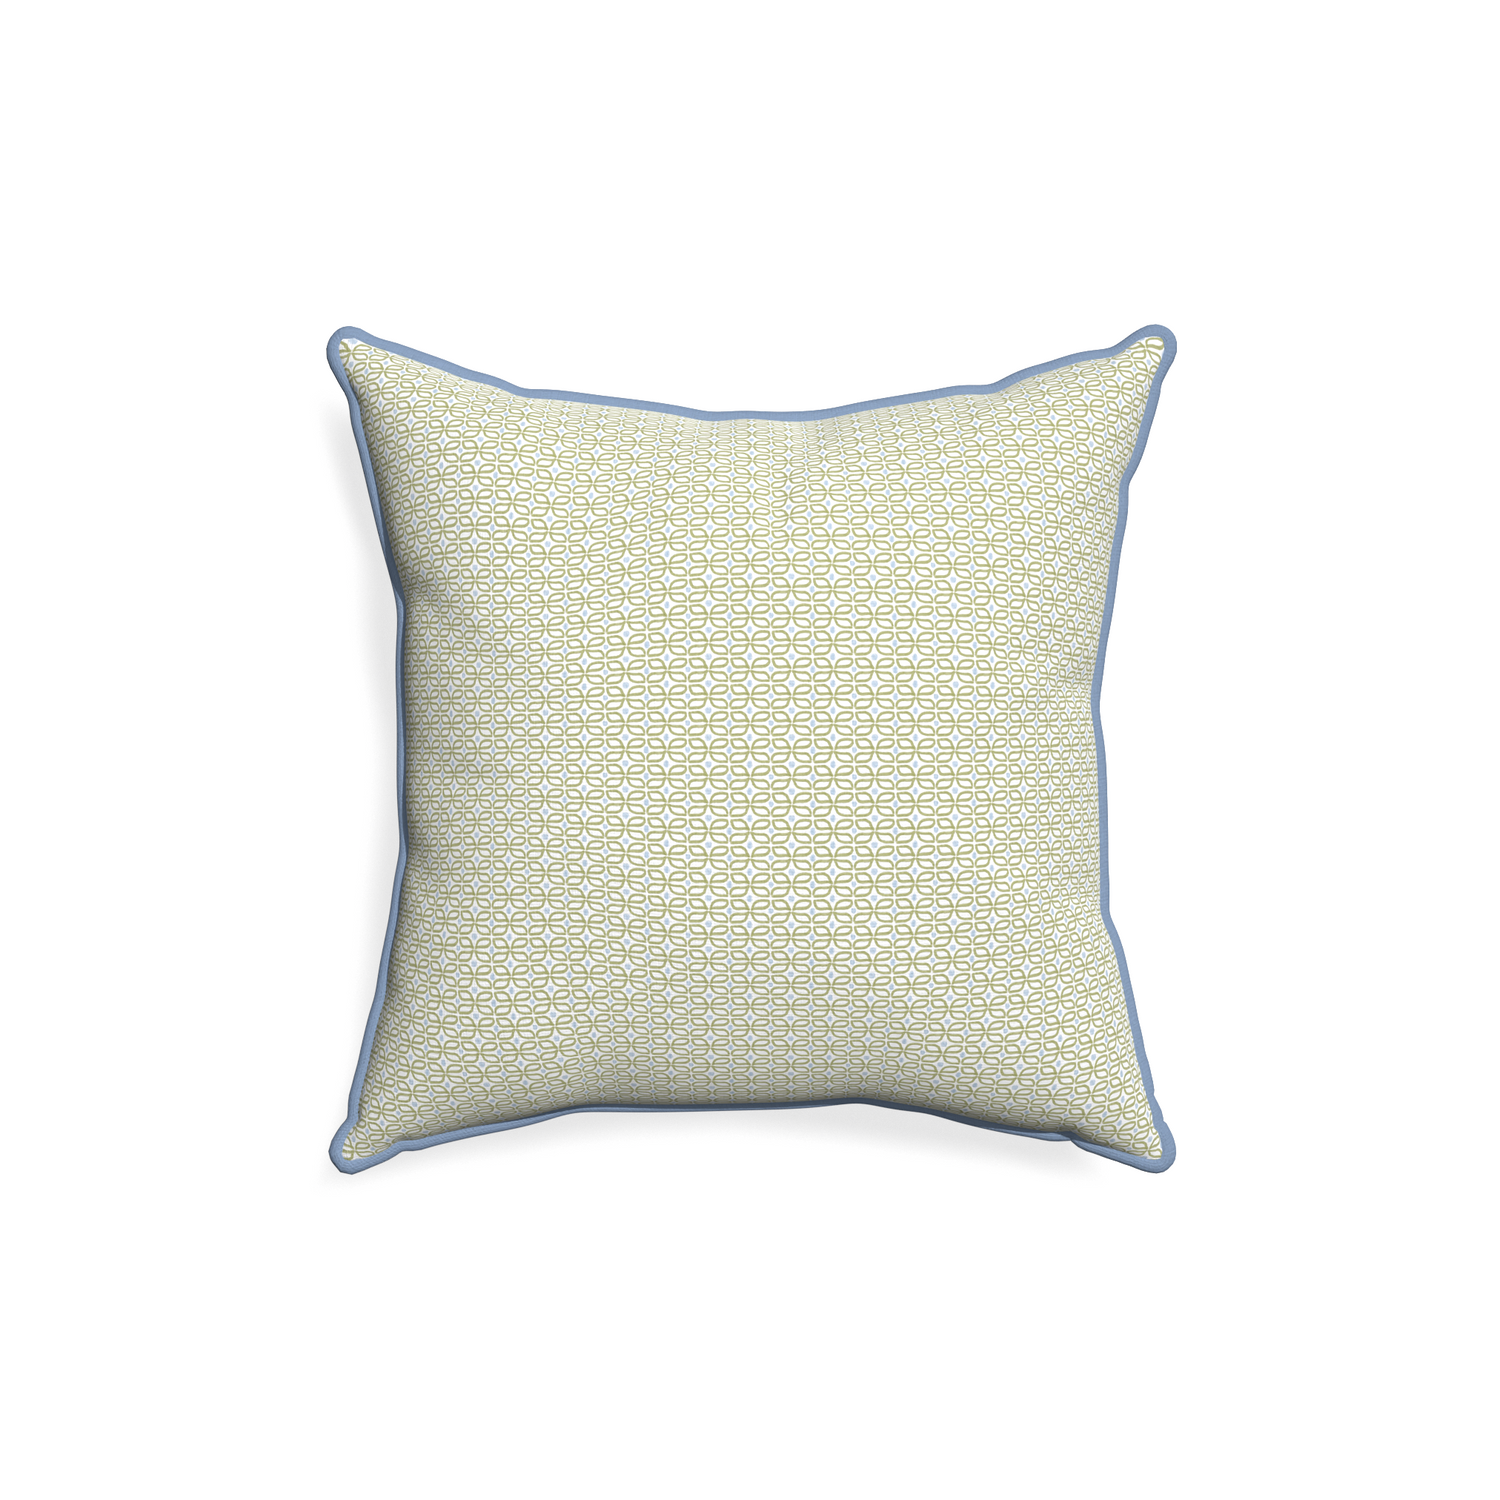 18-square loomi moss custom pillow with sky piping on white background